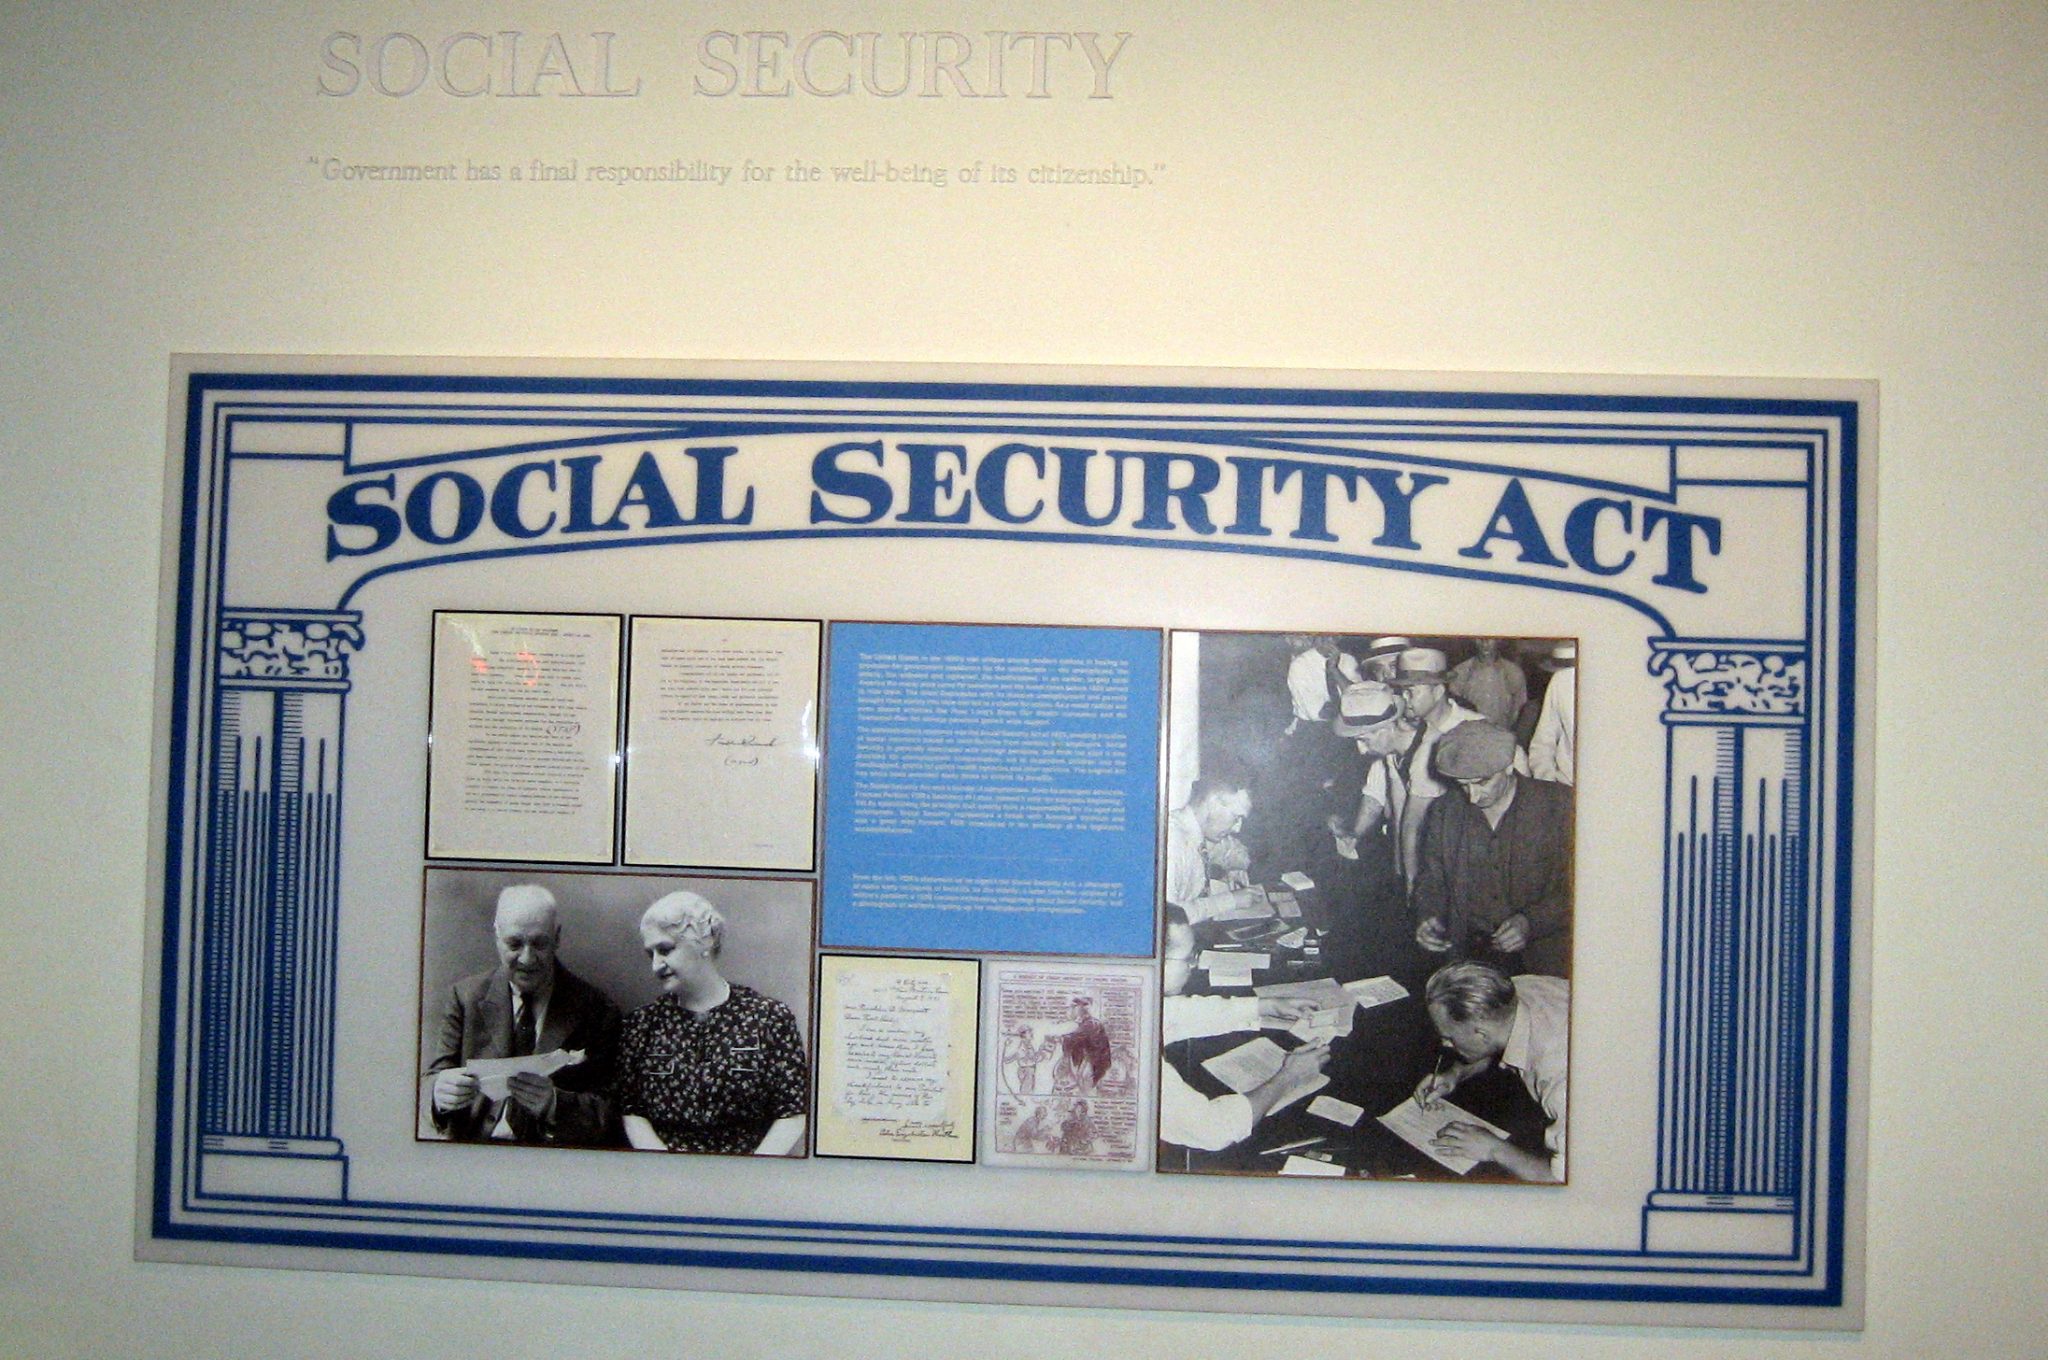 NY - Hyde Park: Franklin D. Roosevelt Presidential Library - Social Security Act